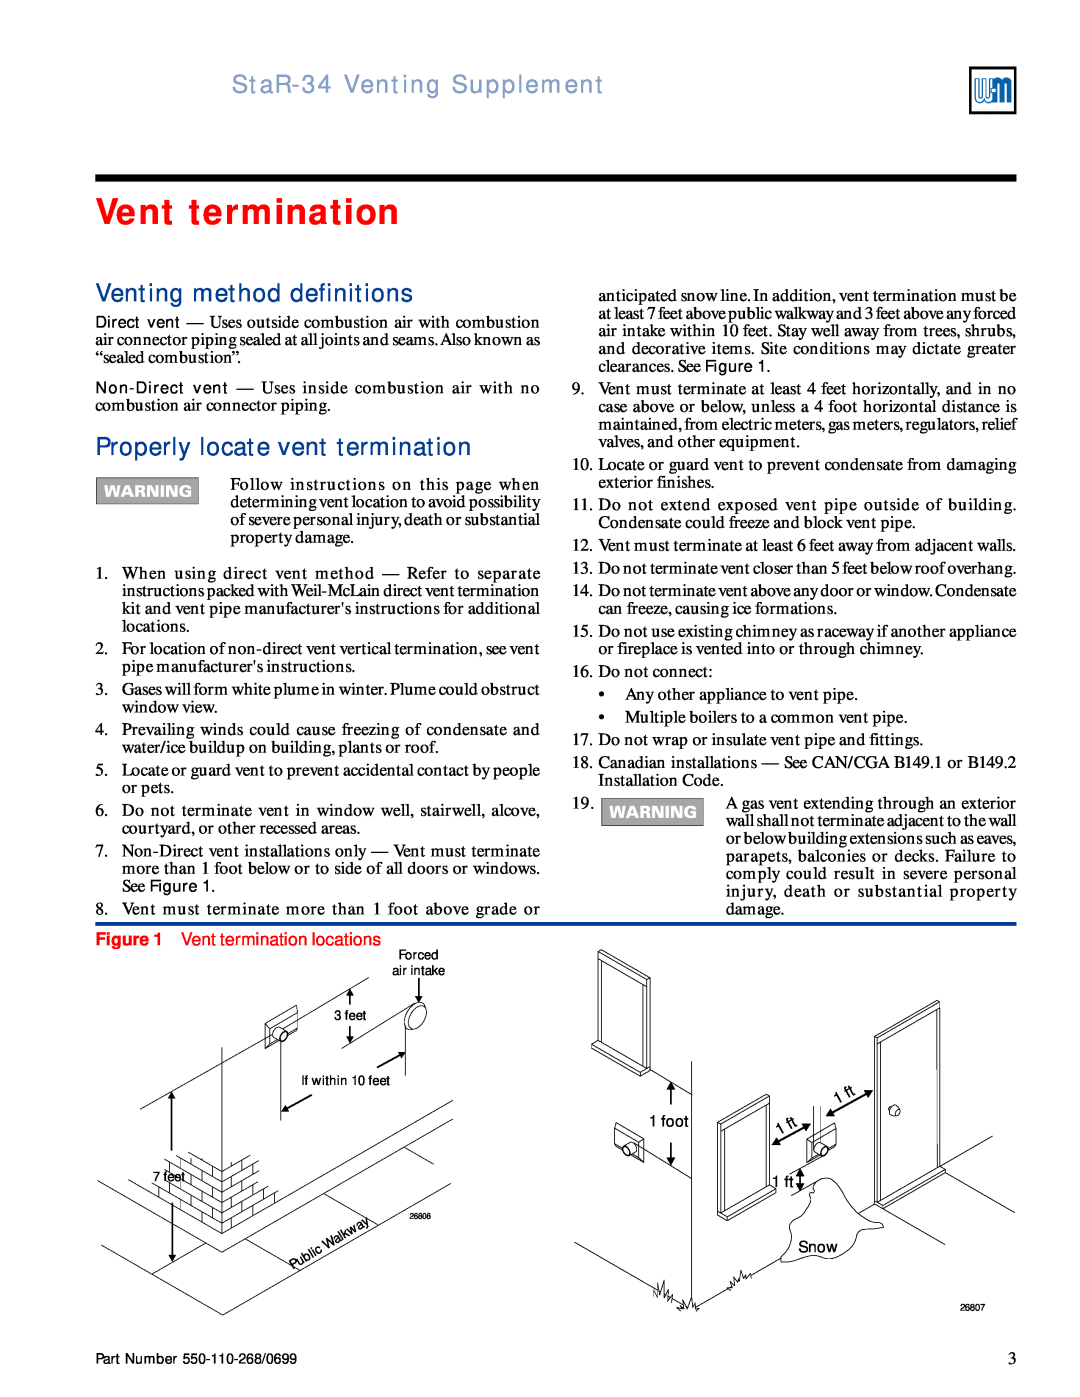 Weil-McLain STAR-34 manual StaR-34Venting Supplement, Venting method definitions, Vent termination locations 